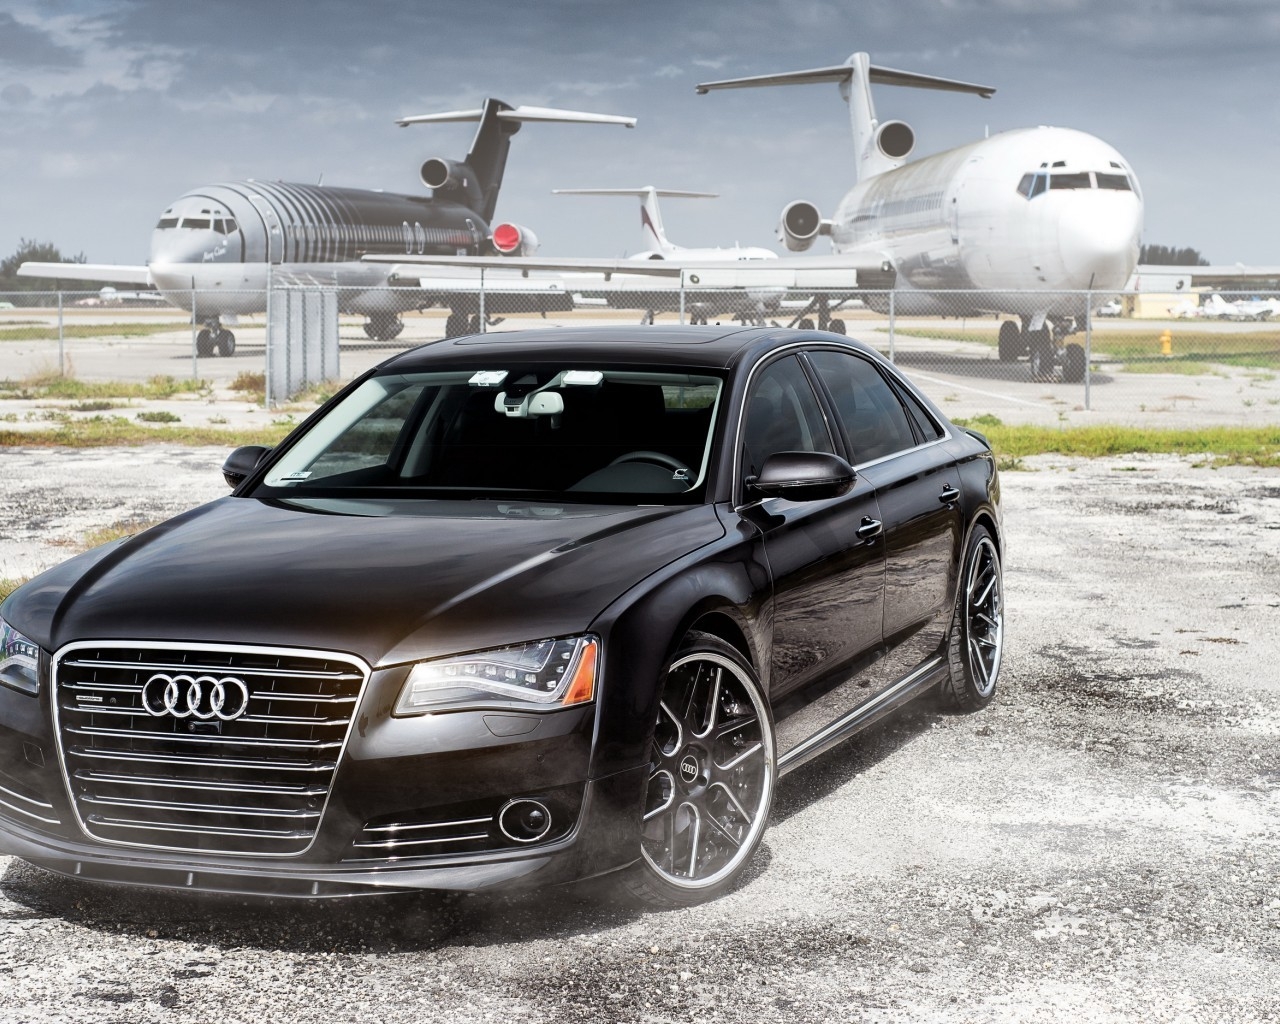 Stunning Audi A8 for 1280 x 1024 resolution